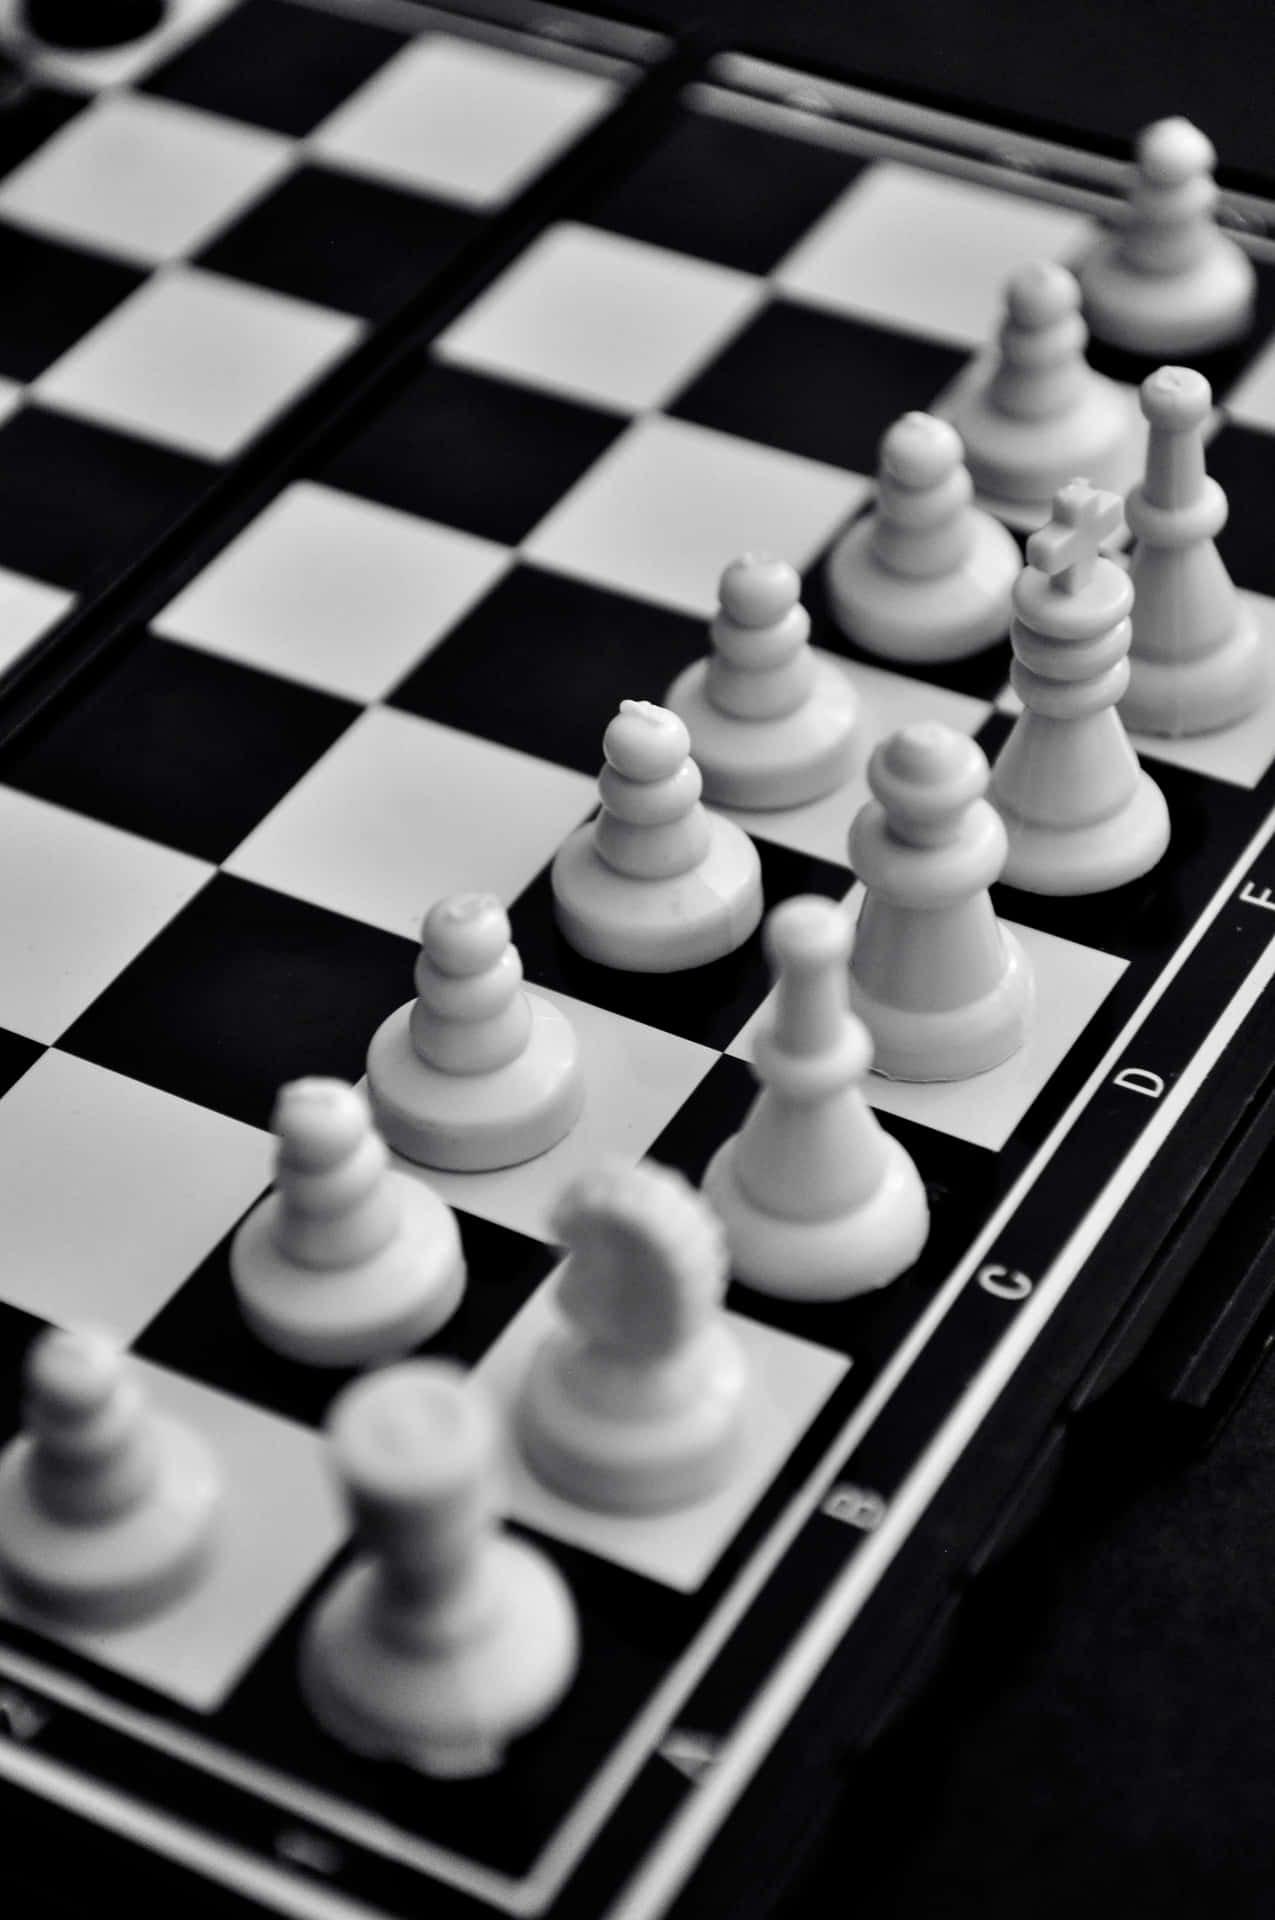 Intense Battle on a Black and White Chessboard Wallpaper